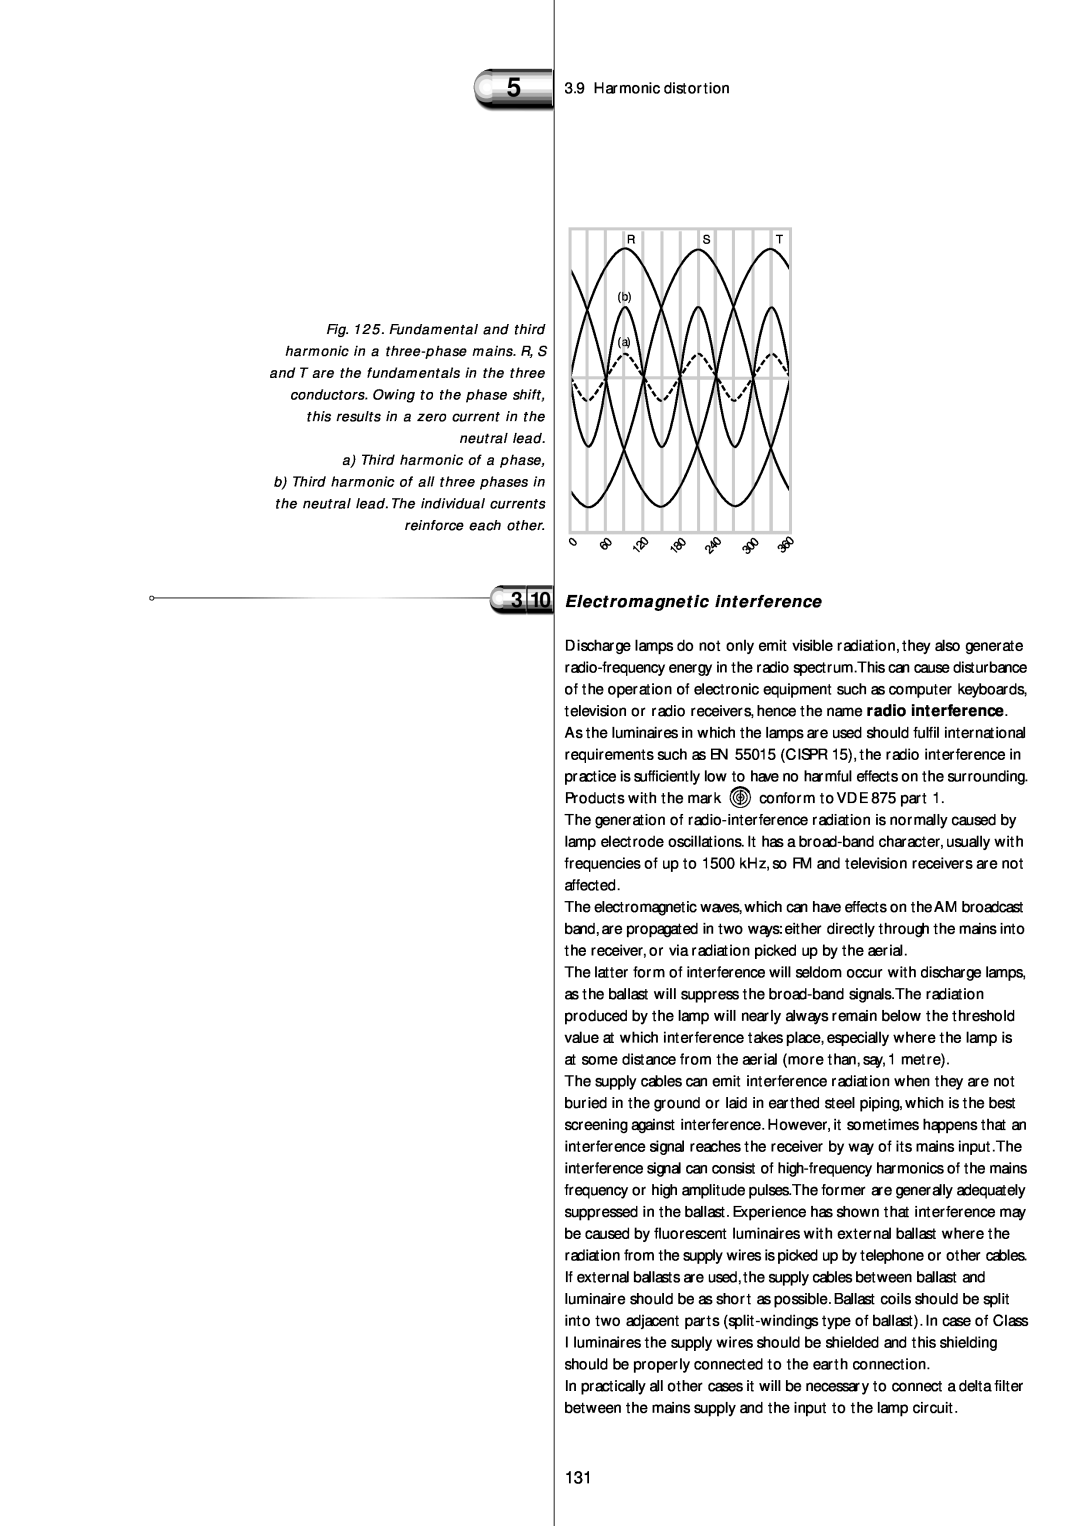 Philips Electromagnetic Lamp manual 3 10Electromagnetic interference, aThird harmonic of a phase, reinforce each other 